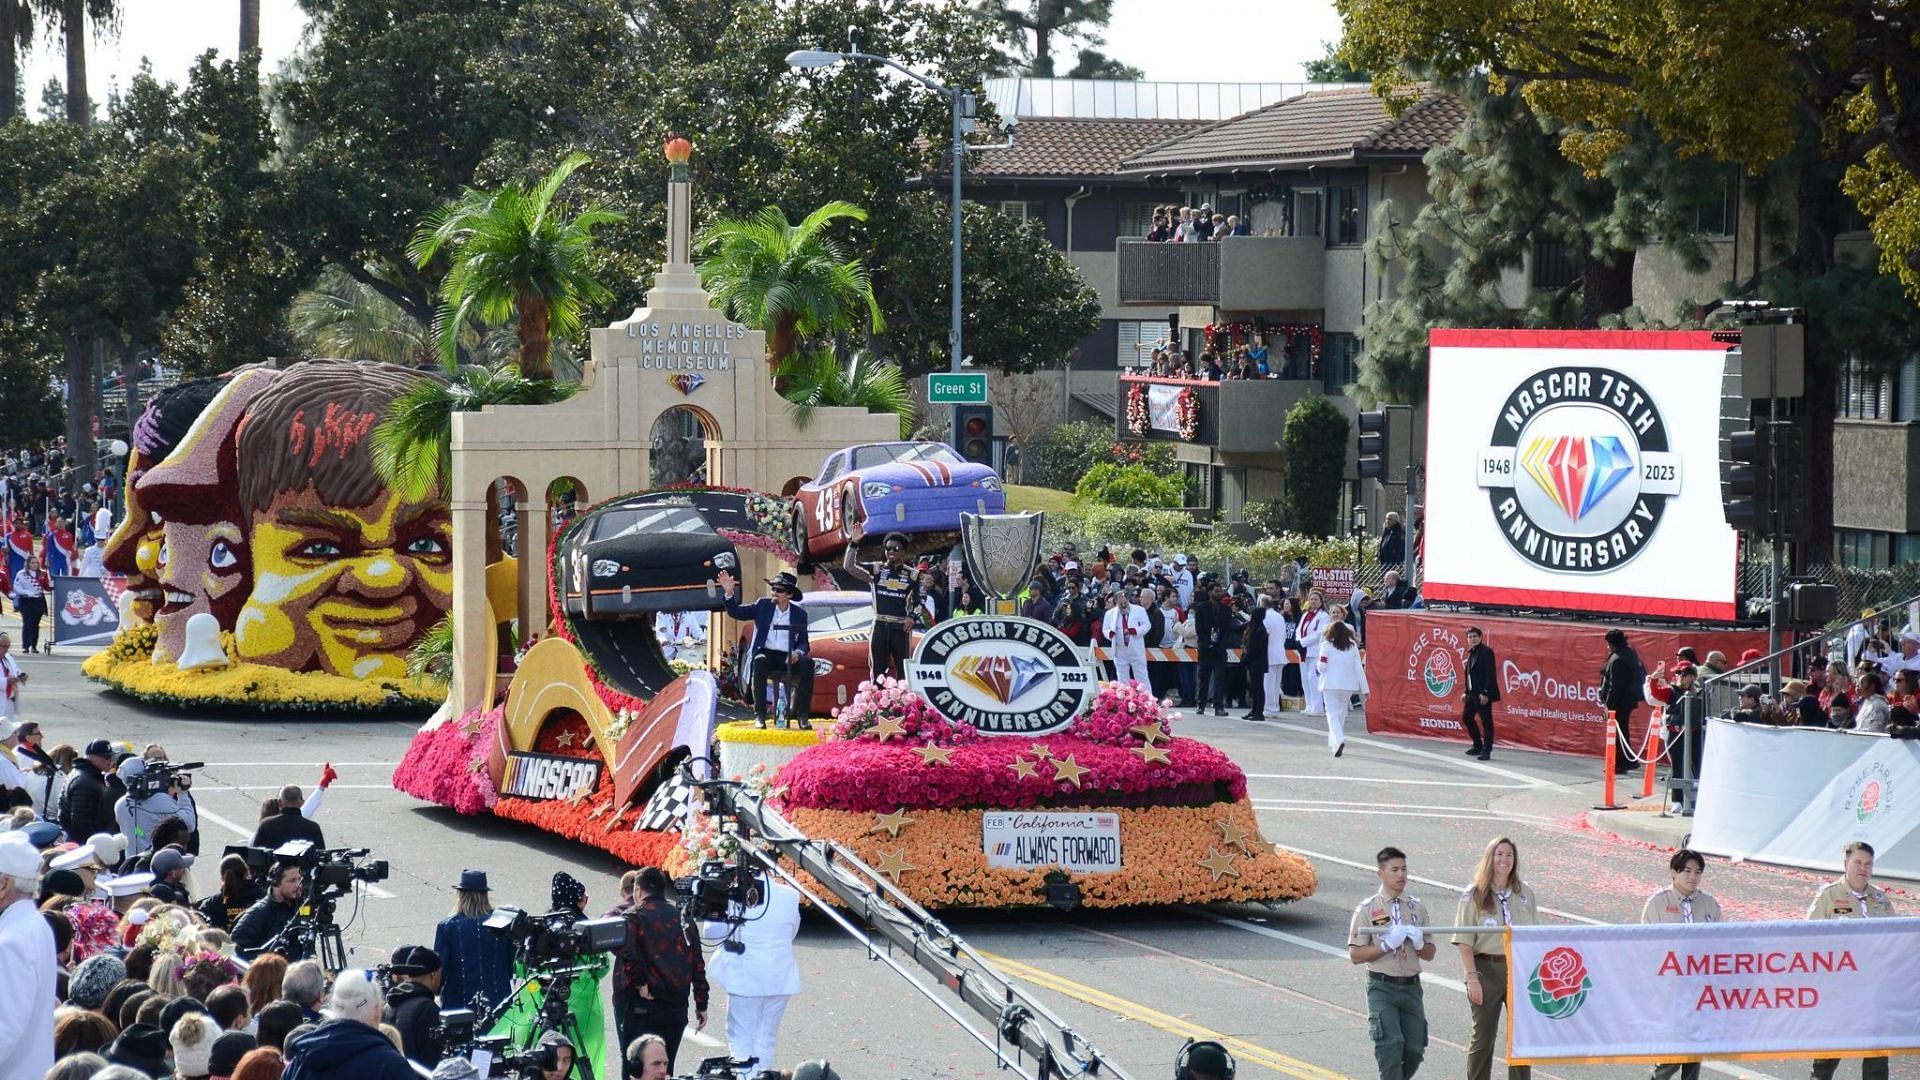 The NASCAR &quot;Always Forward&quot; float appears in the 2023 Rose Parade celebrating 75 years of the sport.